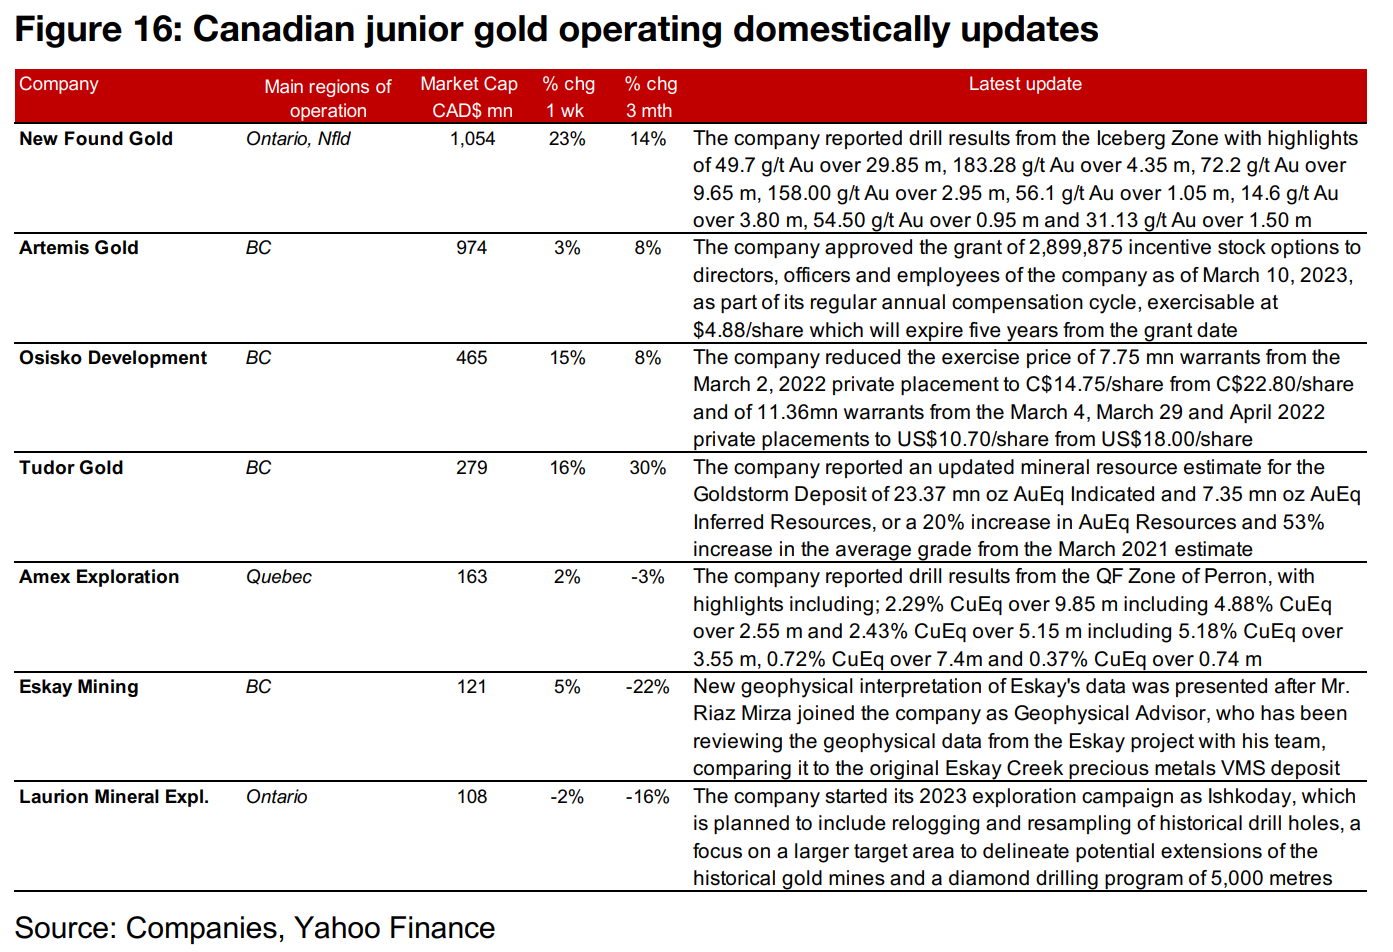 Gold producers and TSXV gold soars with many double digit gains